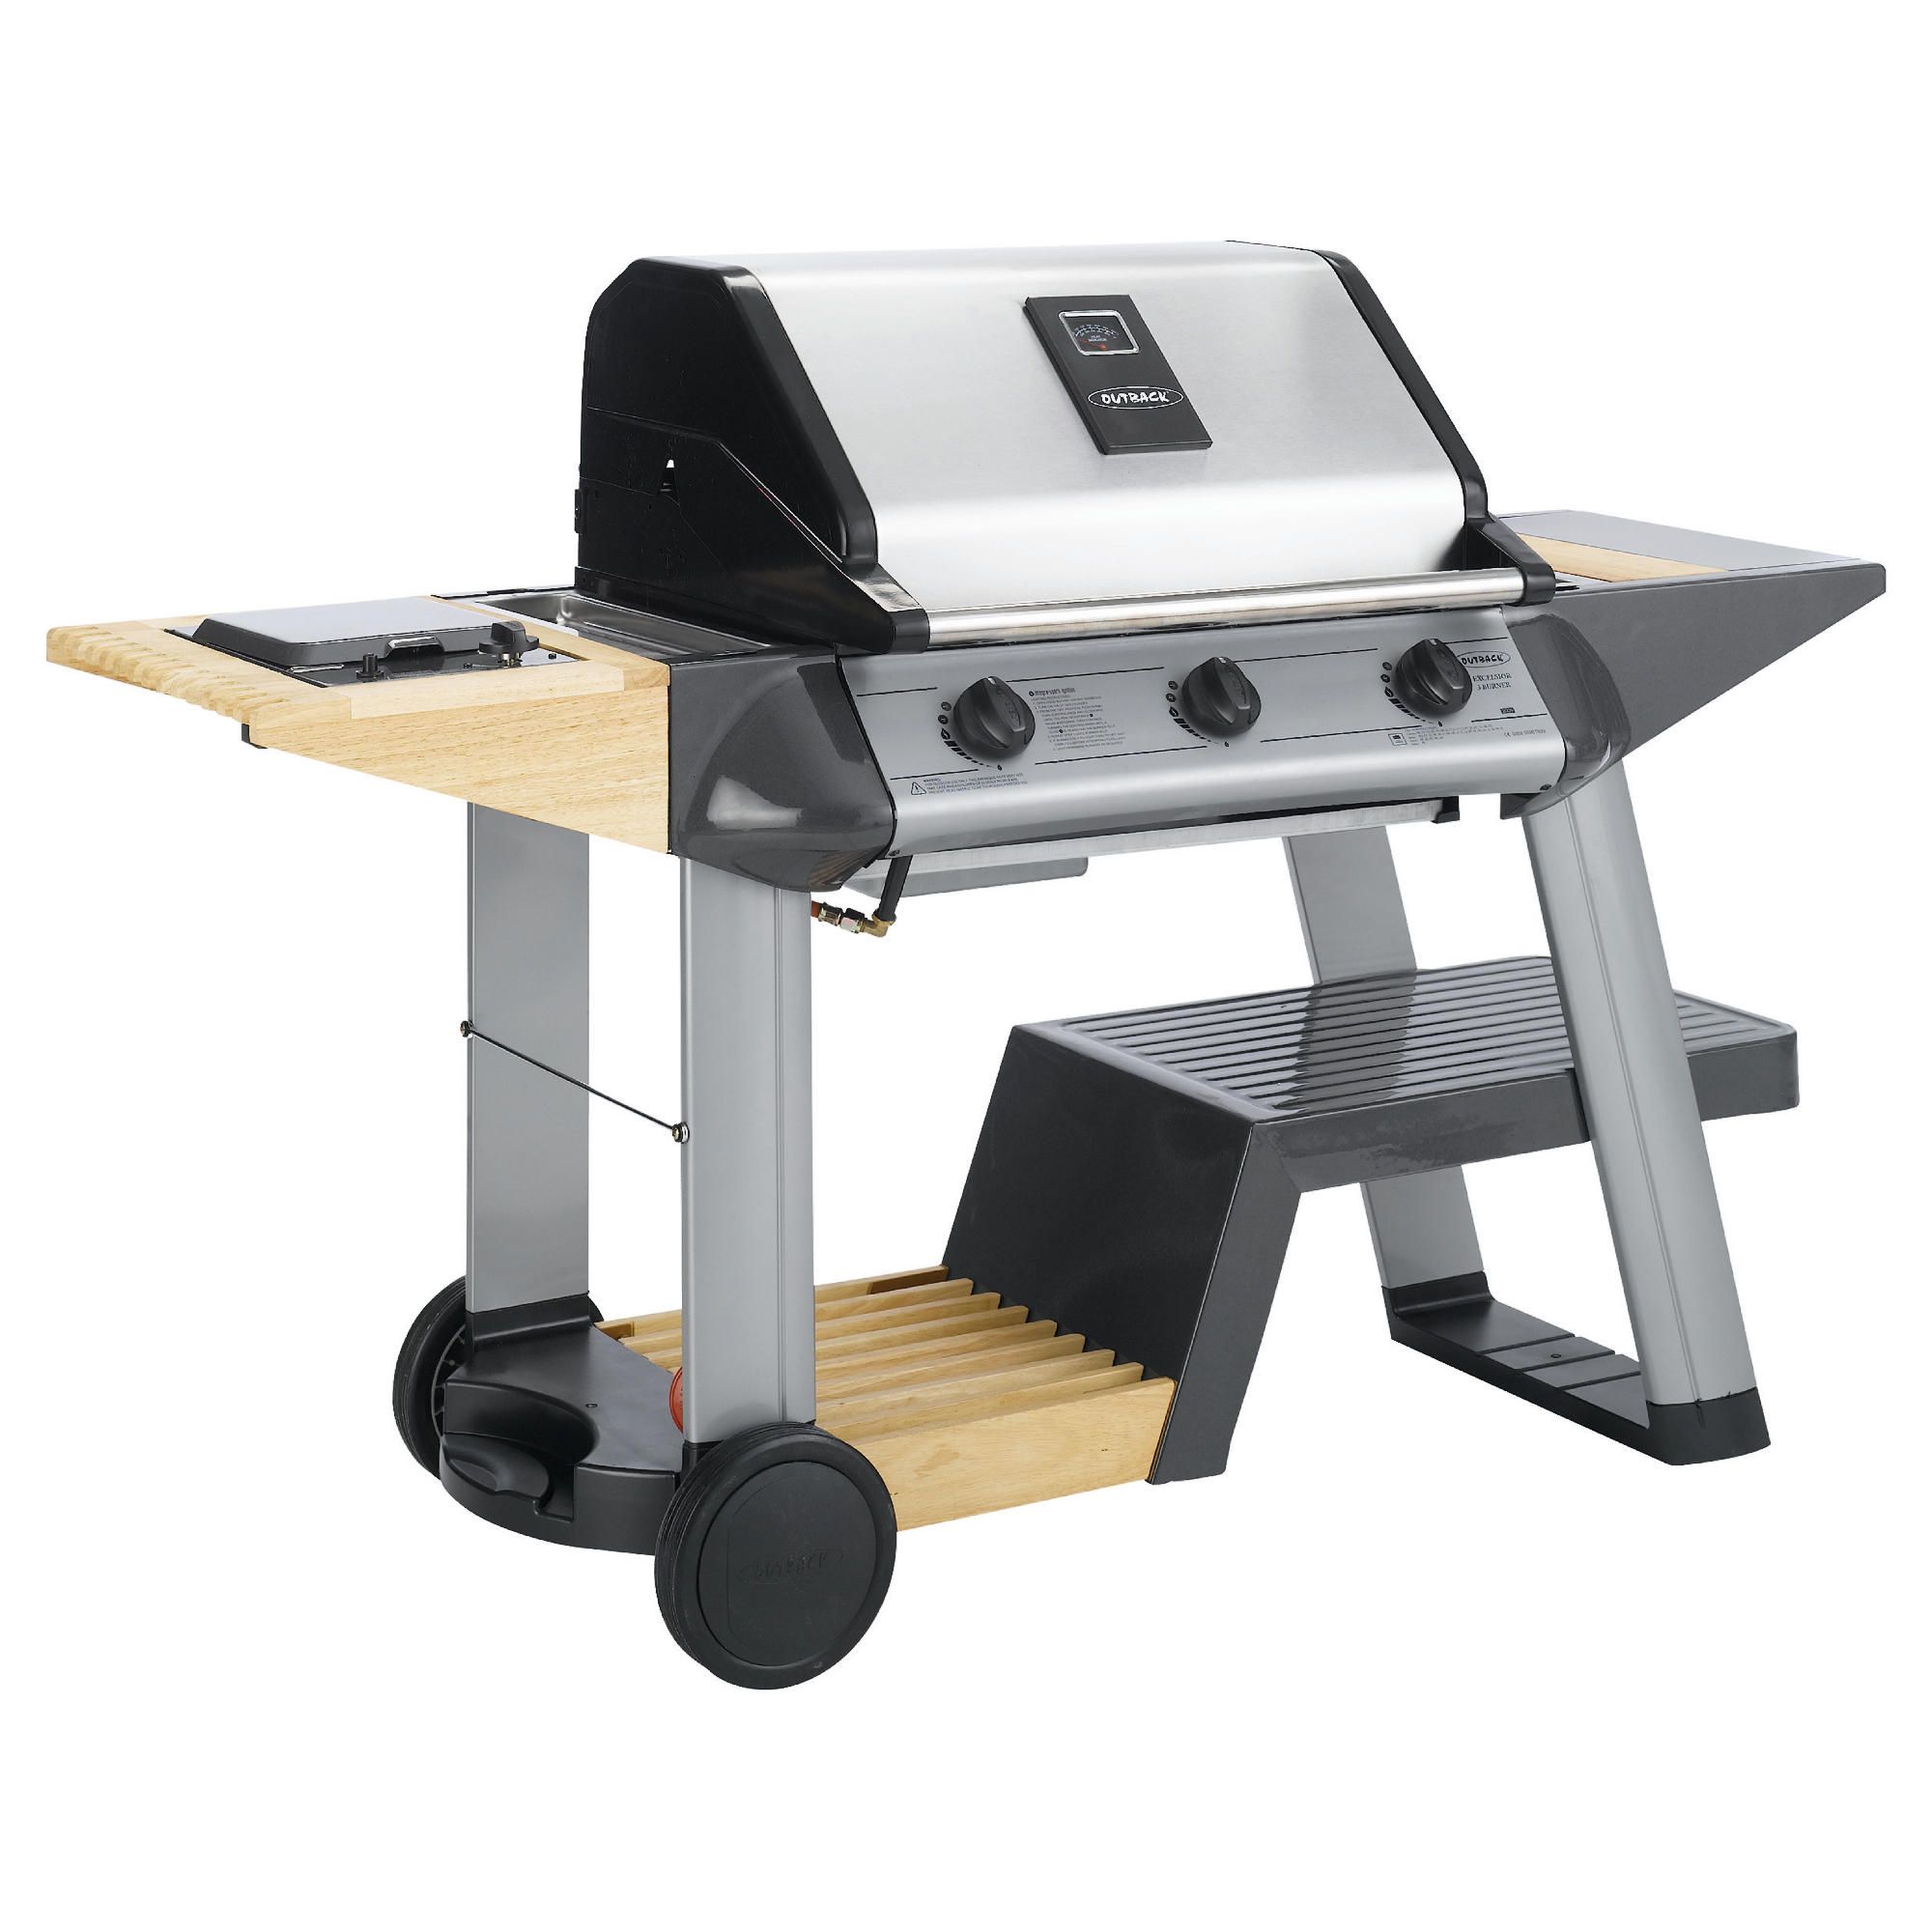 Outback Excelsior 3 Burner Gas BBQ with Cover at Tesco Direct